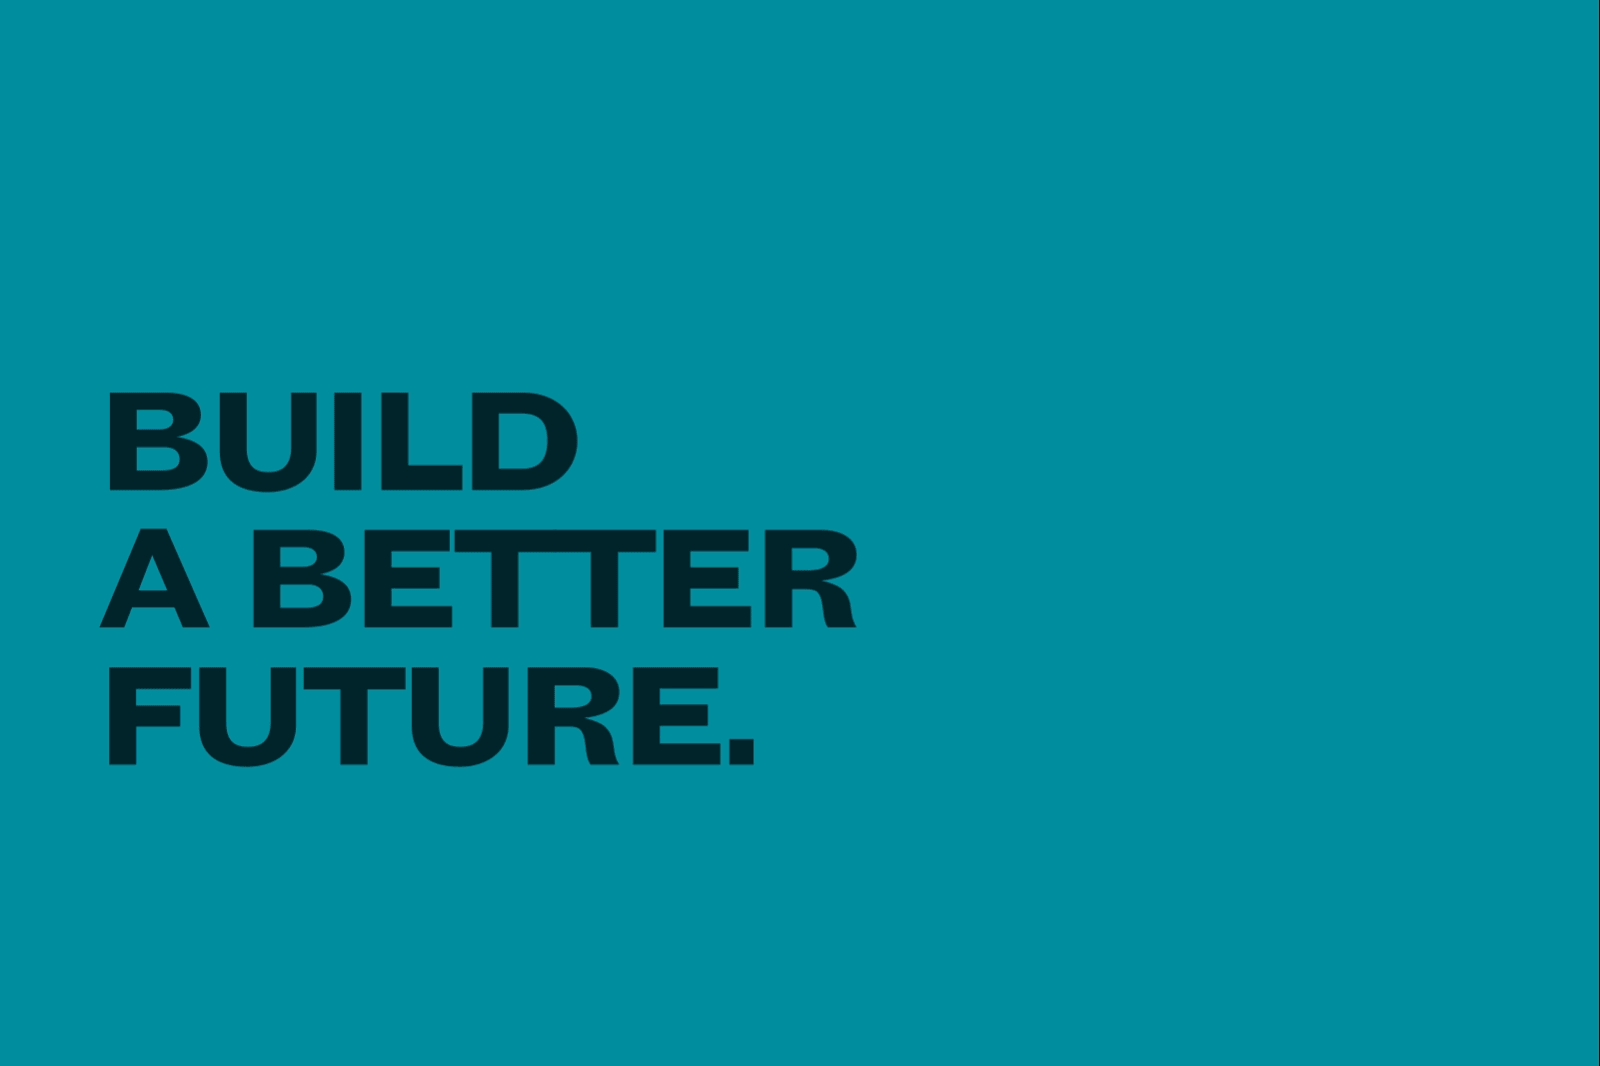 Brand Identity Projects, This Day. Build a Better Future Gif